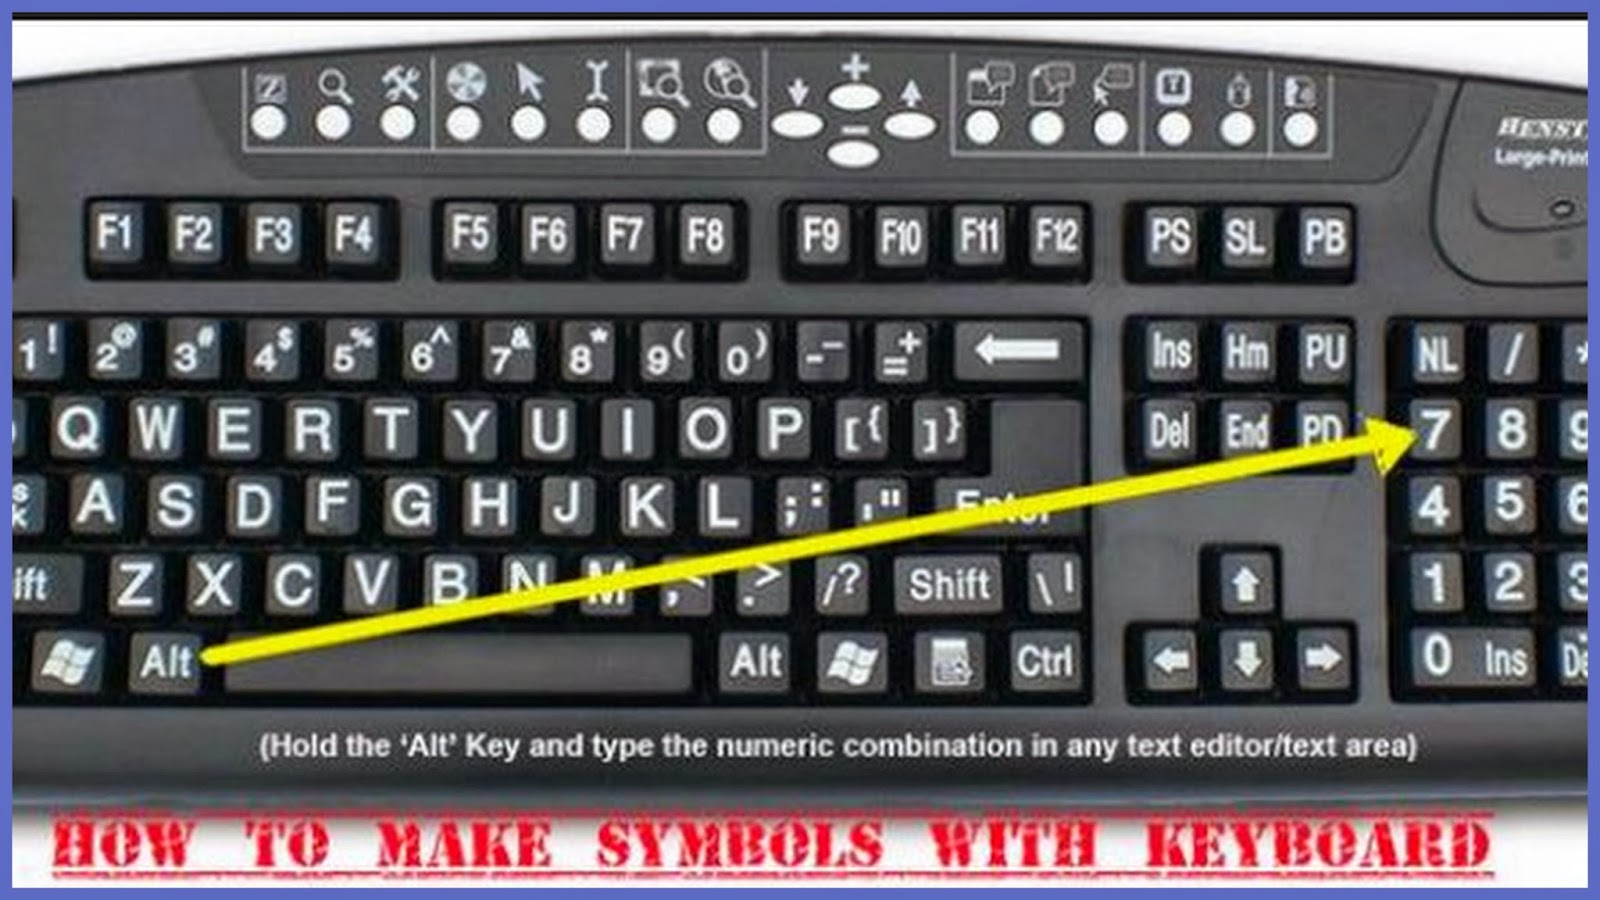 Re Train Your Brain To Happiness How To Make Symbols With Your Keyboard